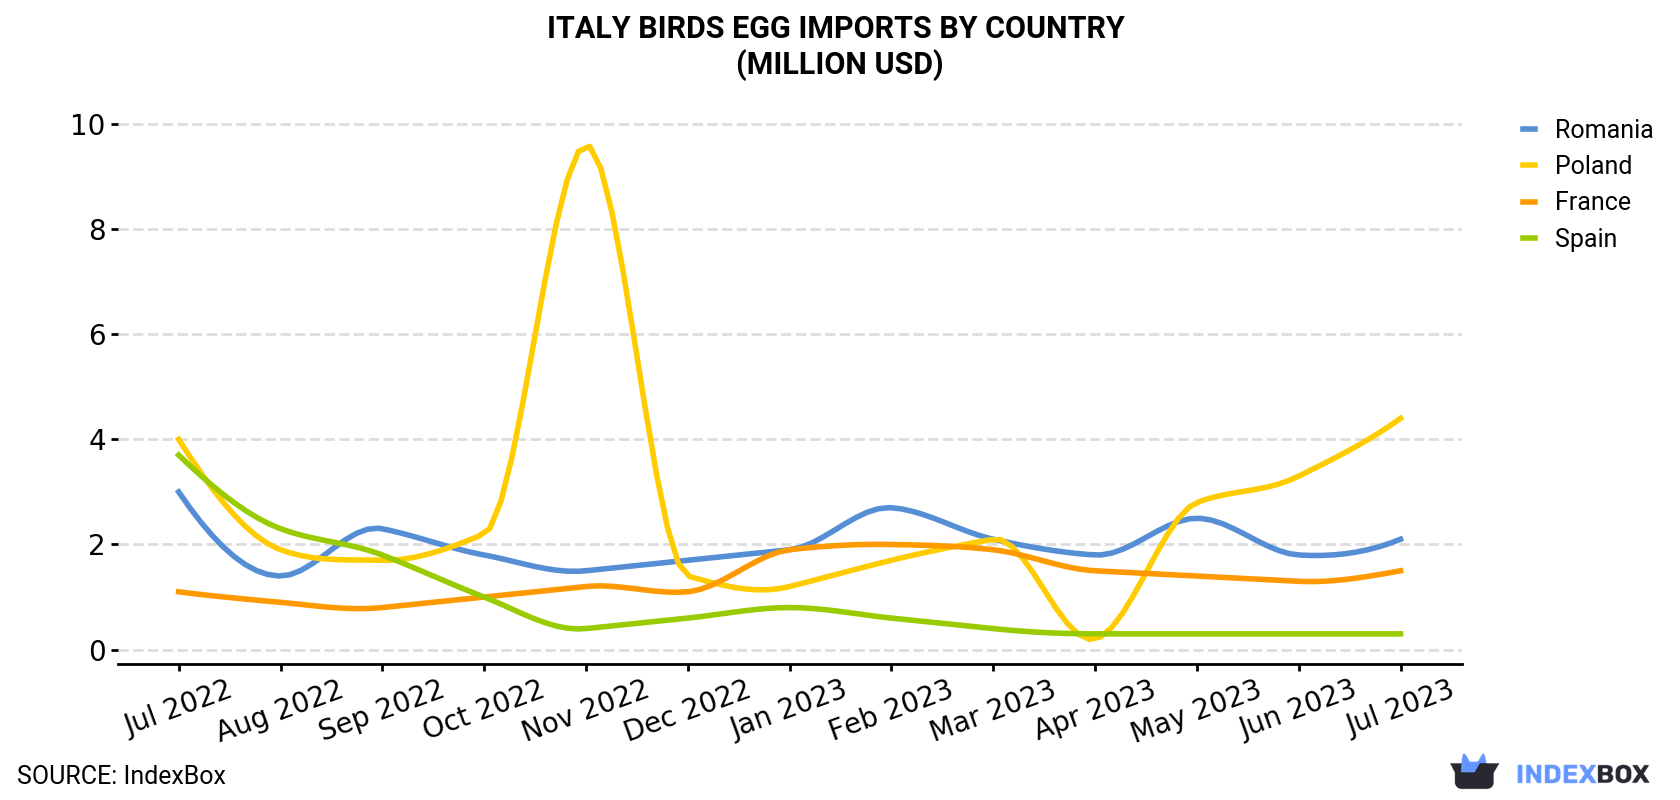 Italy Birds Egg Imports By Country (Million USD)